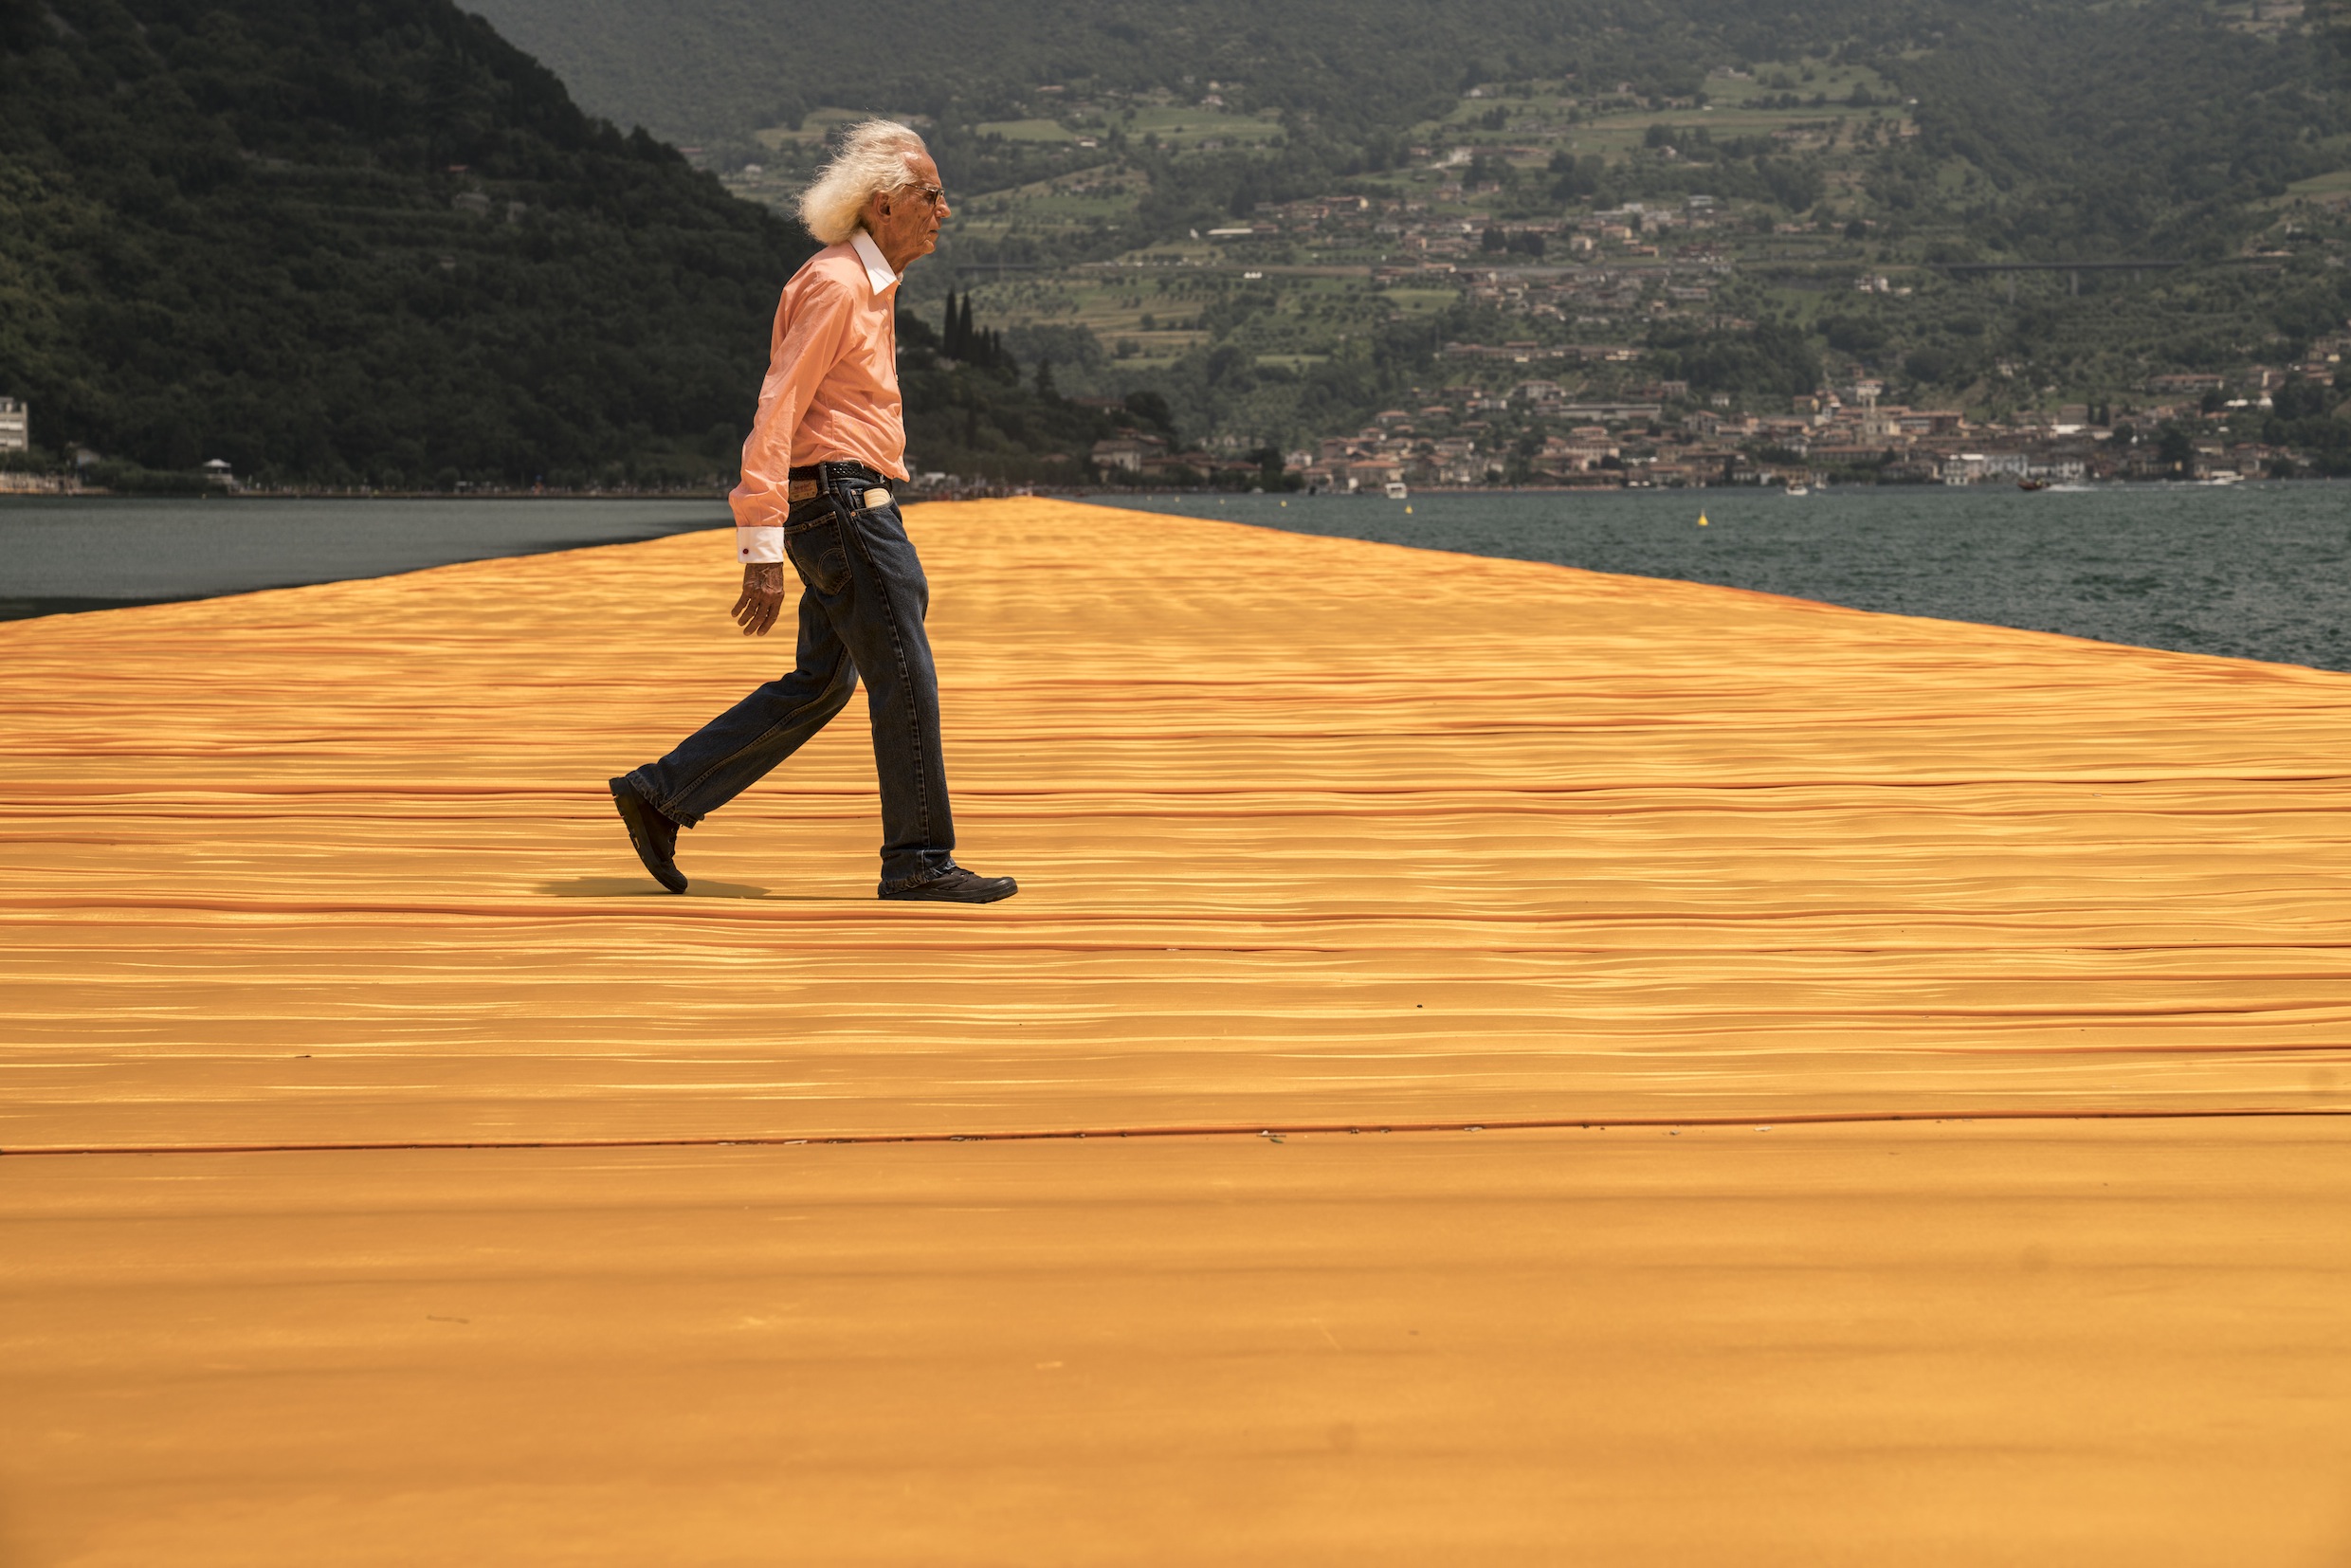 Christo at the Floating Piers, Lake Iseo, Italy, 2014-16 (Photo: Wolfgang Volz)